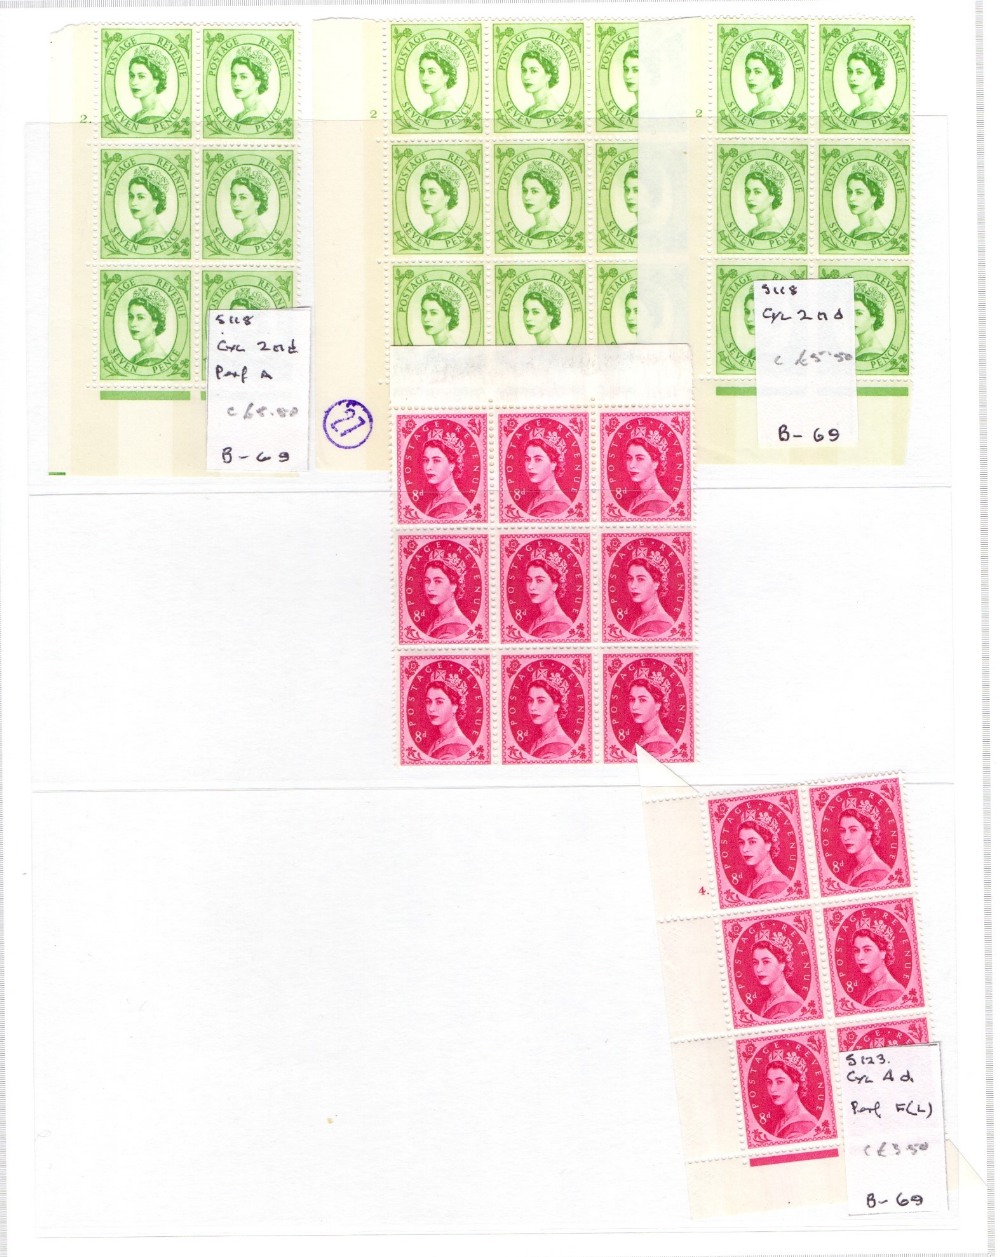 GREAT BRITAIN STAMPS : Wilding Collection, mint cylinder blocks, coils, singles, - Image 12 of 18